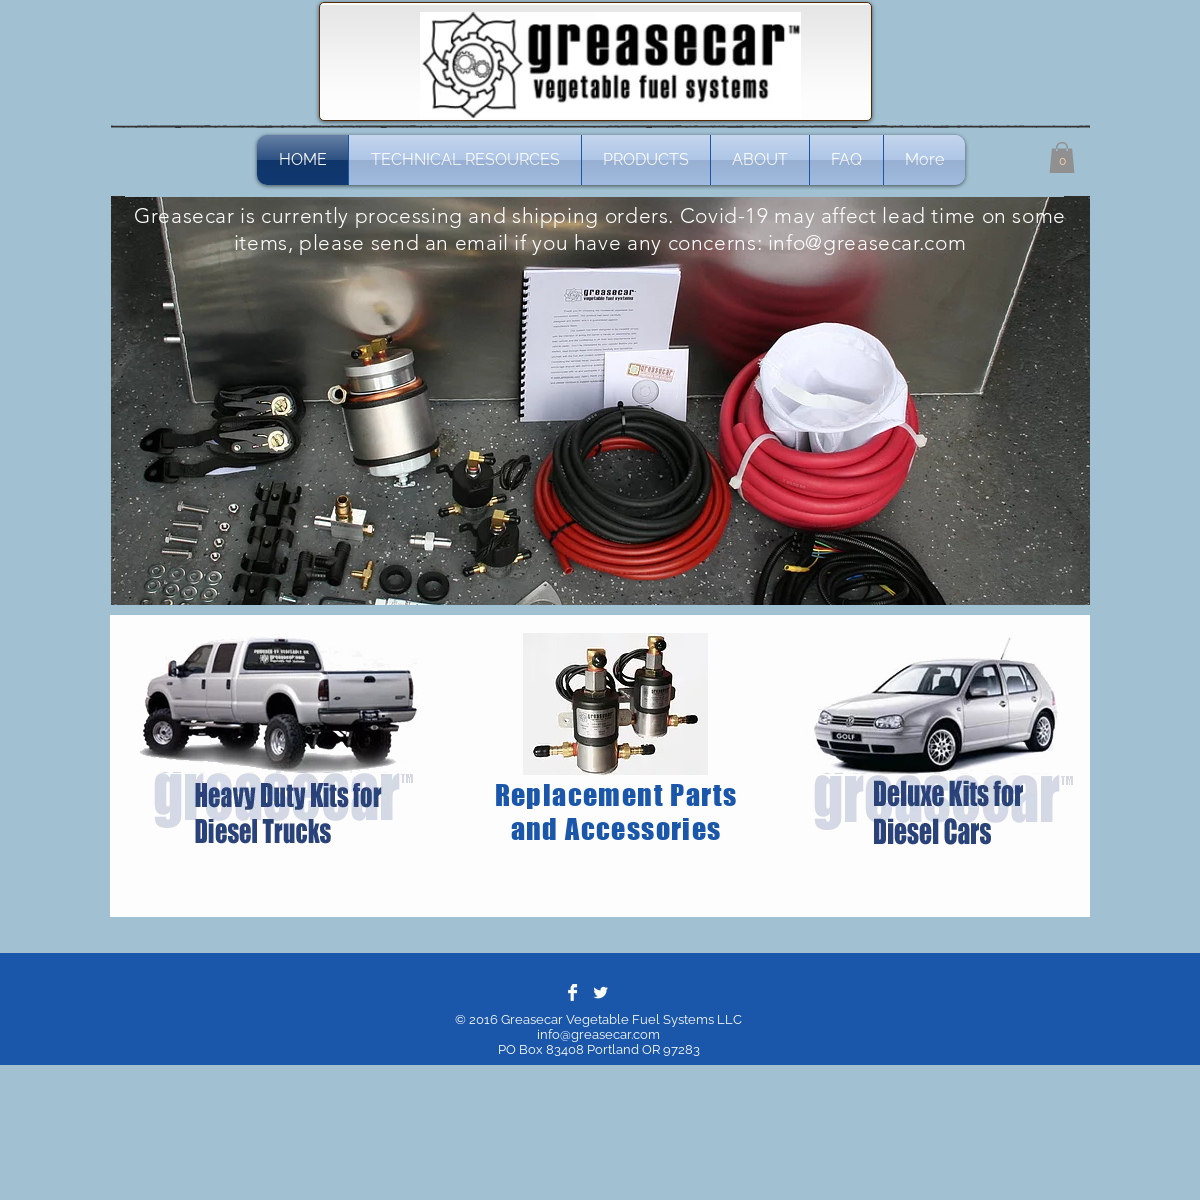 A complete backup of greasecar.com